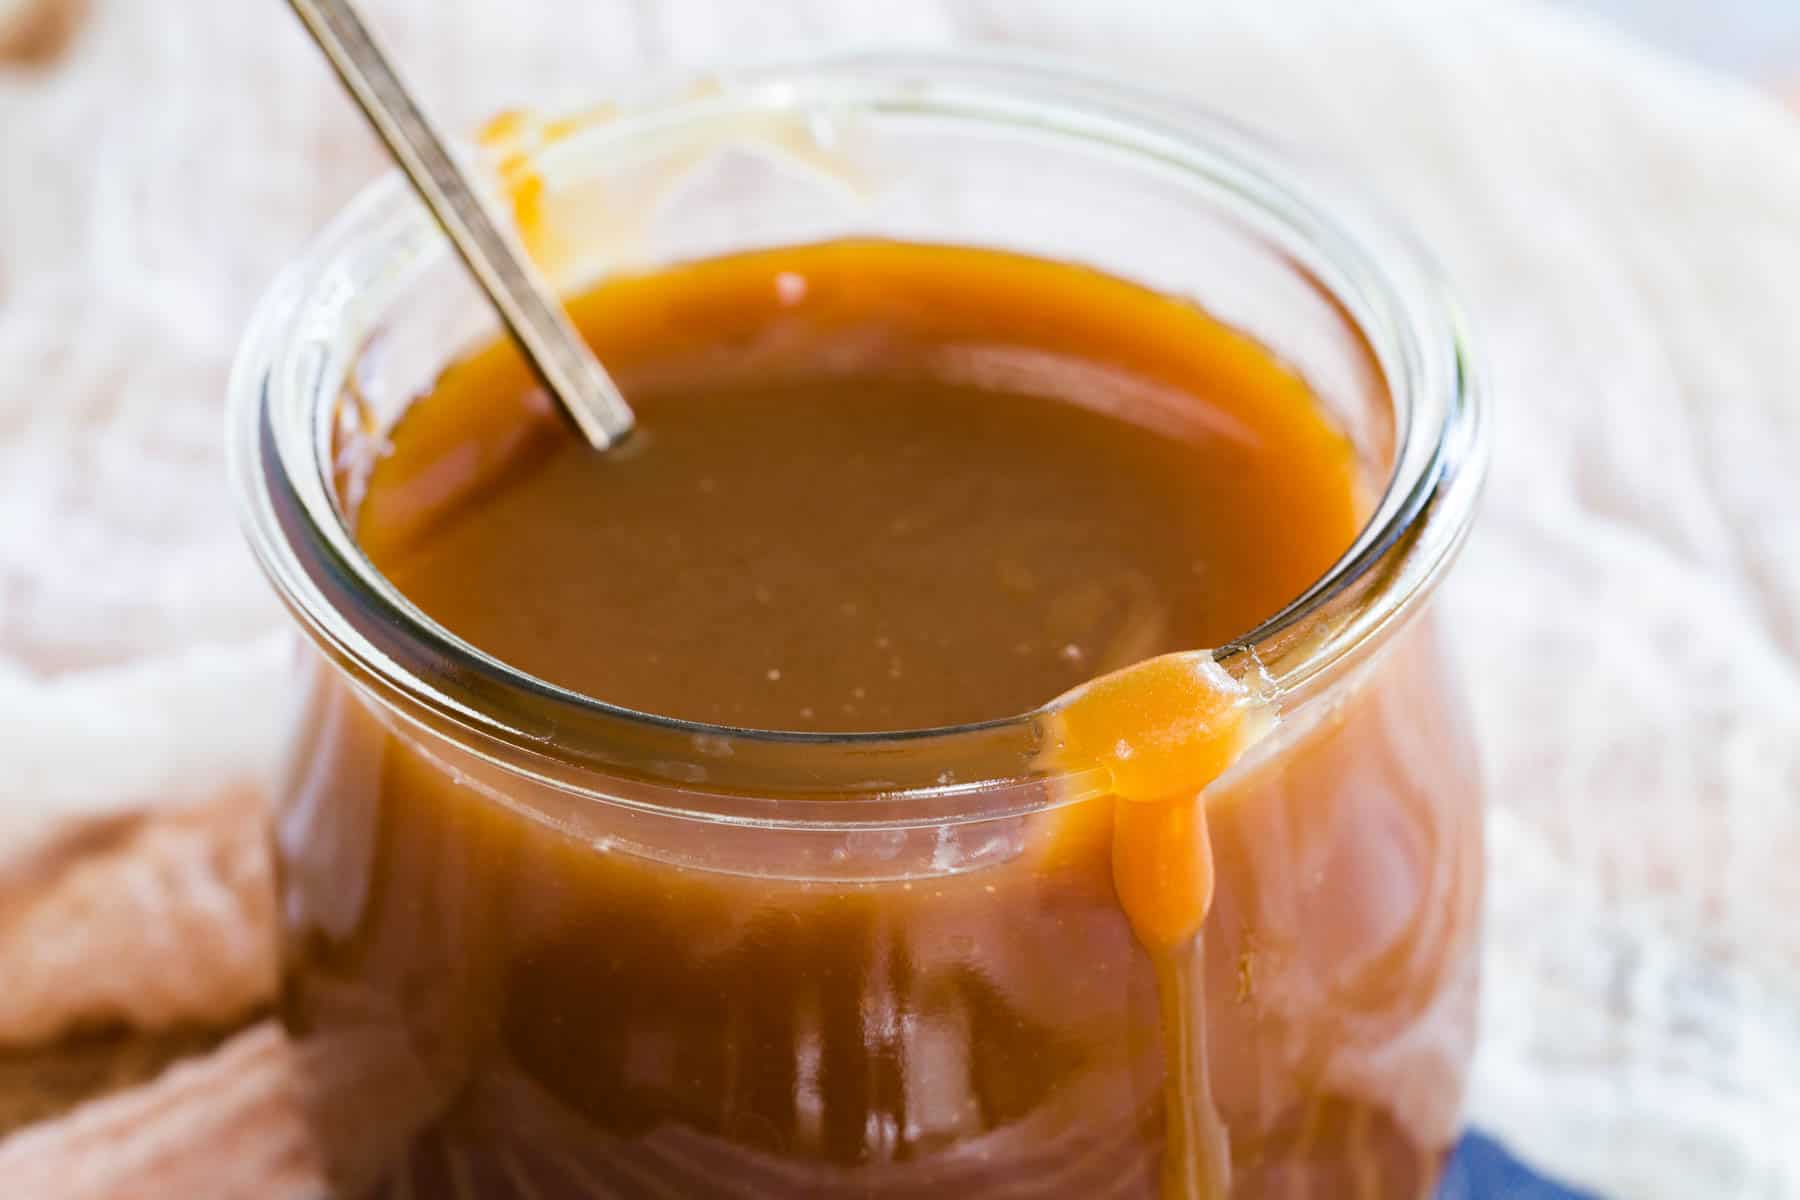 Caramel sauce in a glass jar with a spoon.